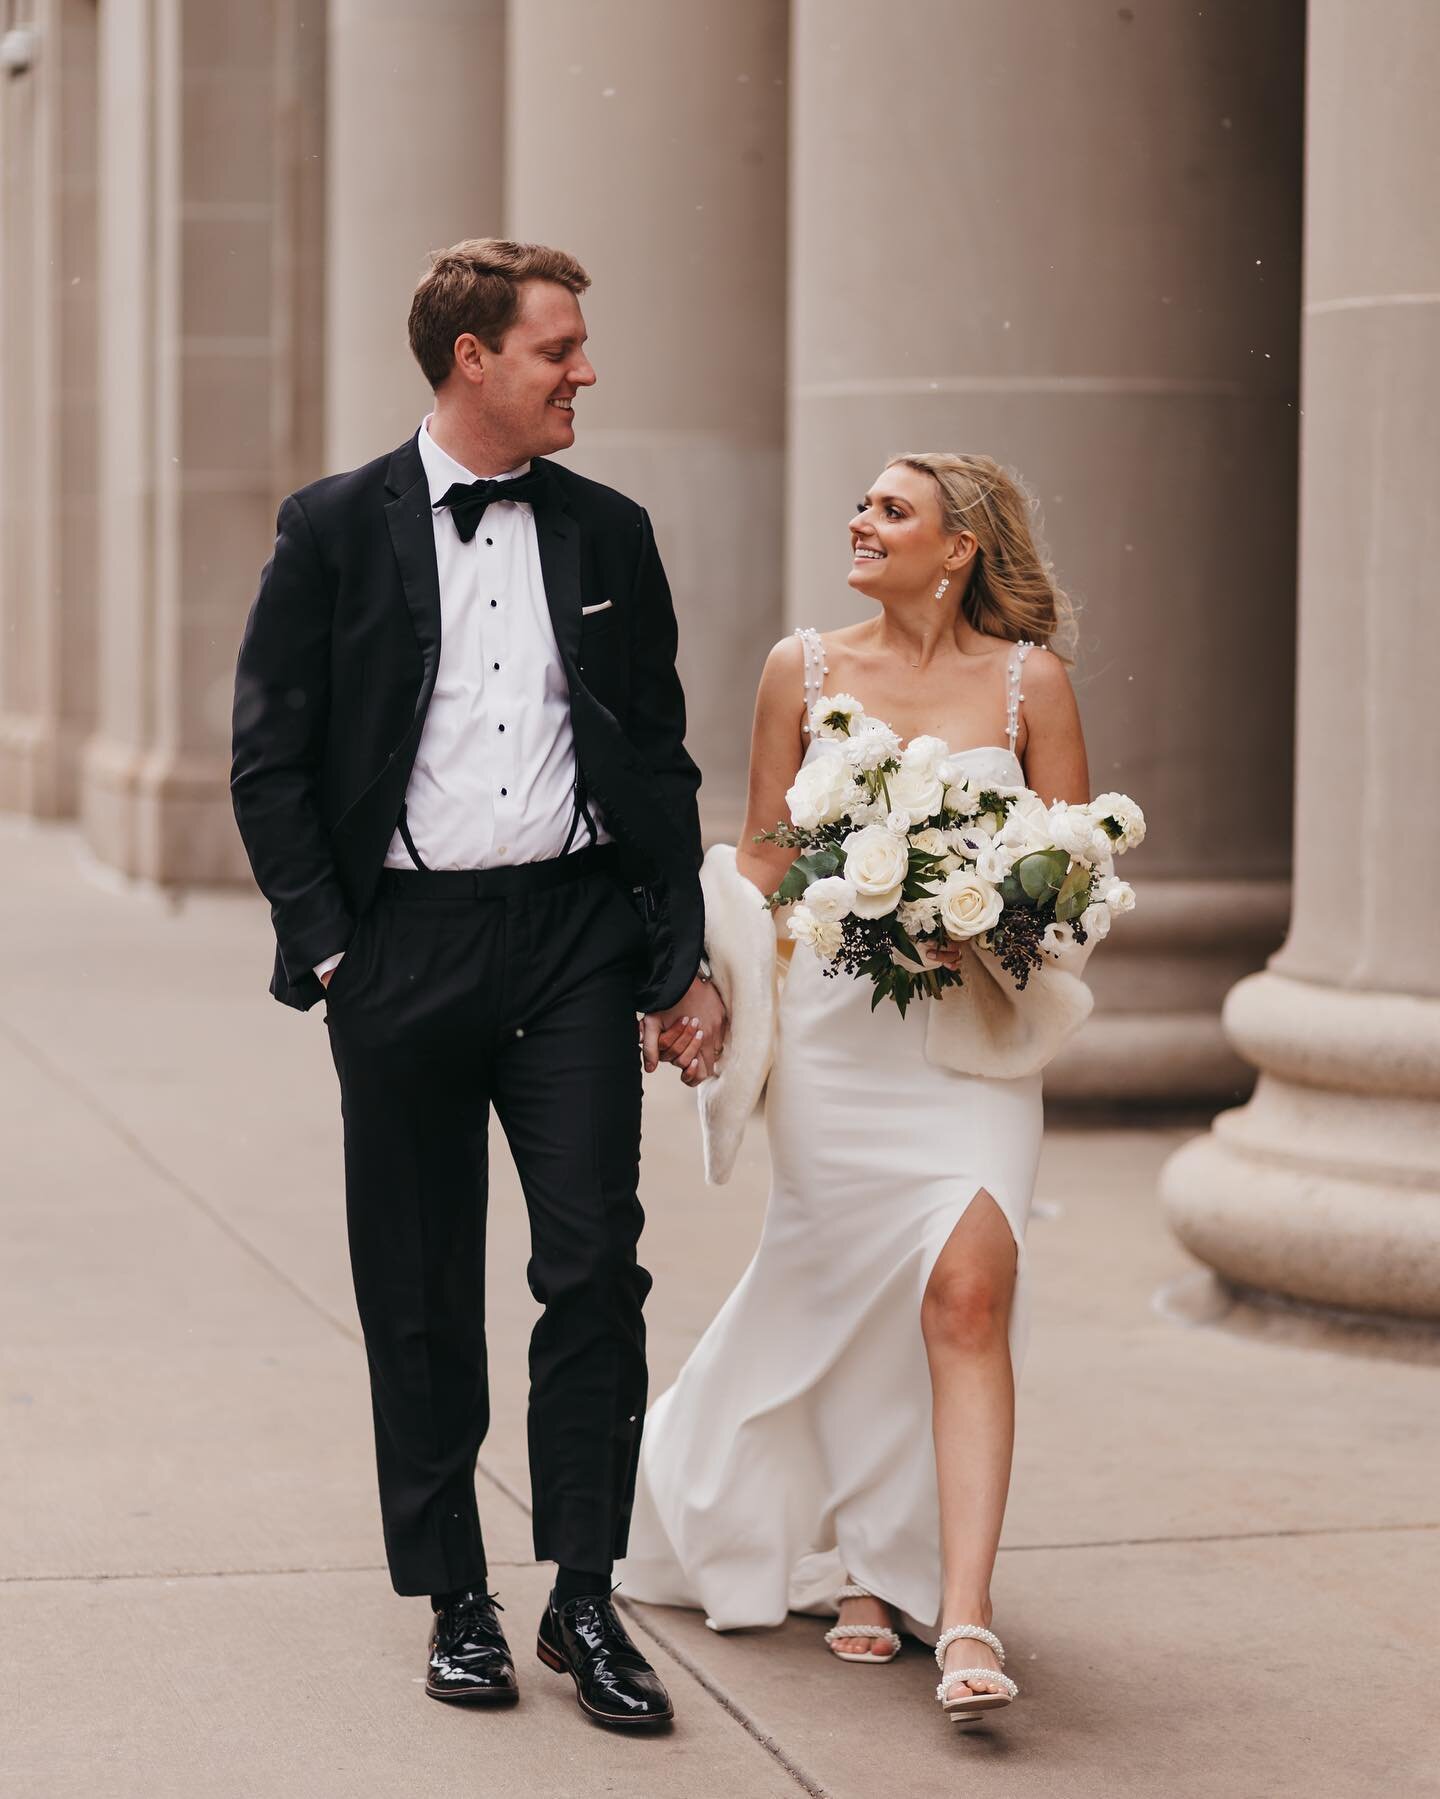 guys there is not enough love for these stunning winter chi weddings!!!! ❄️❄️❄️snow and wind are romantic + union station is warm and surprisingly chic! 

second shot for iconic queen @marissakellyphotography 🤍